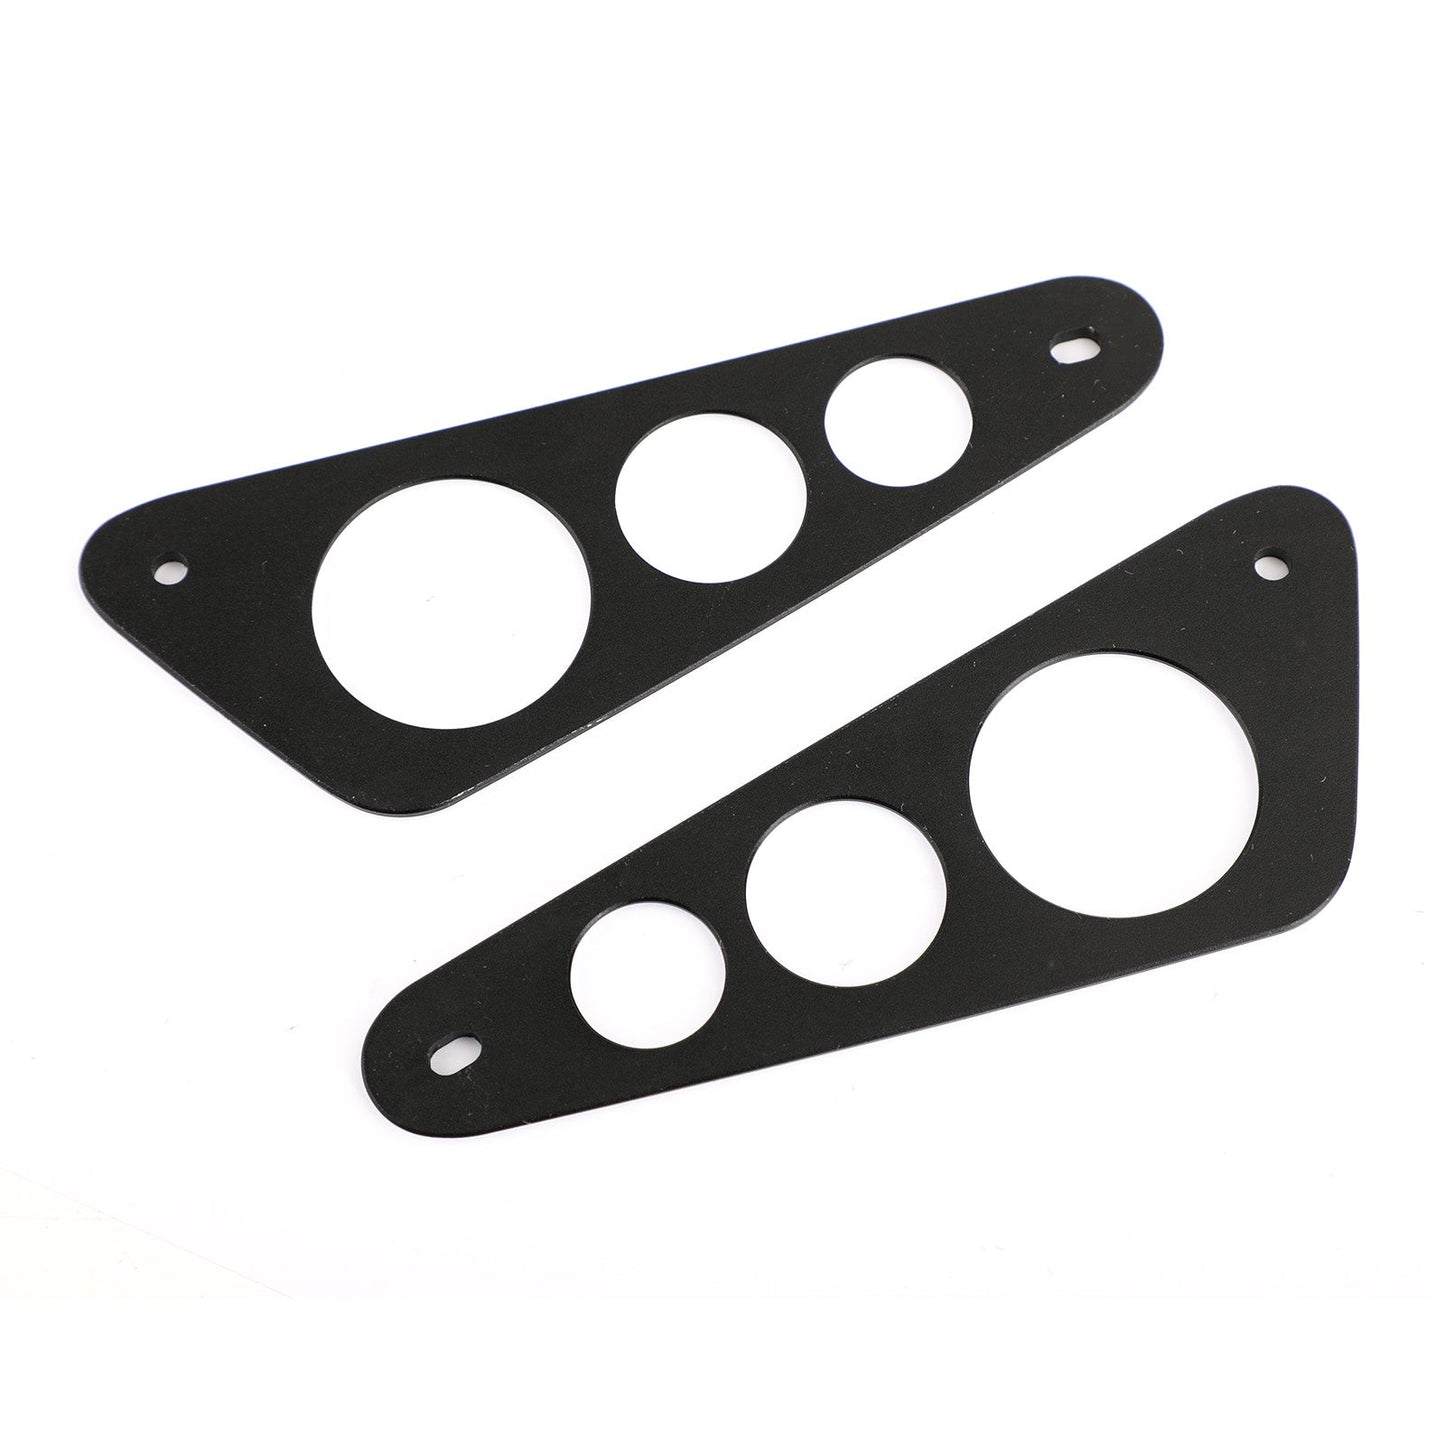 Rear Panel Guard Side Cover Plate Protector Fit For Yamaha XSR155 2019-2020